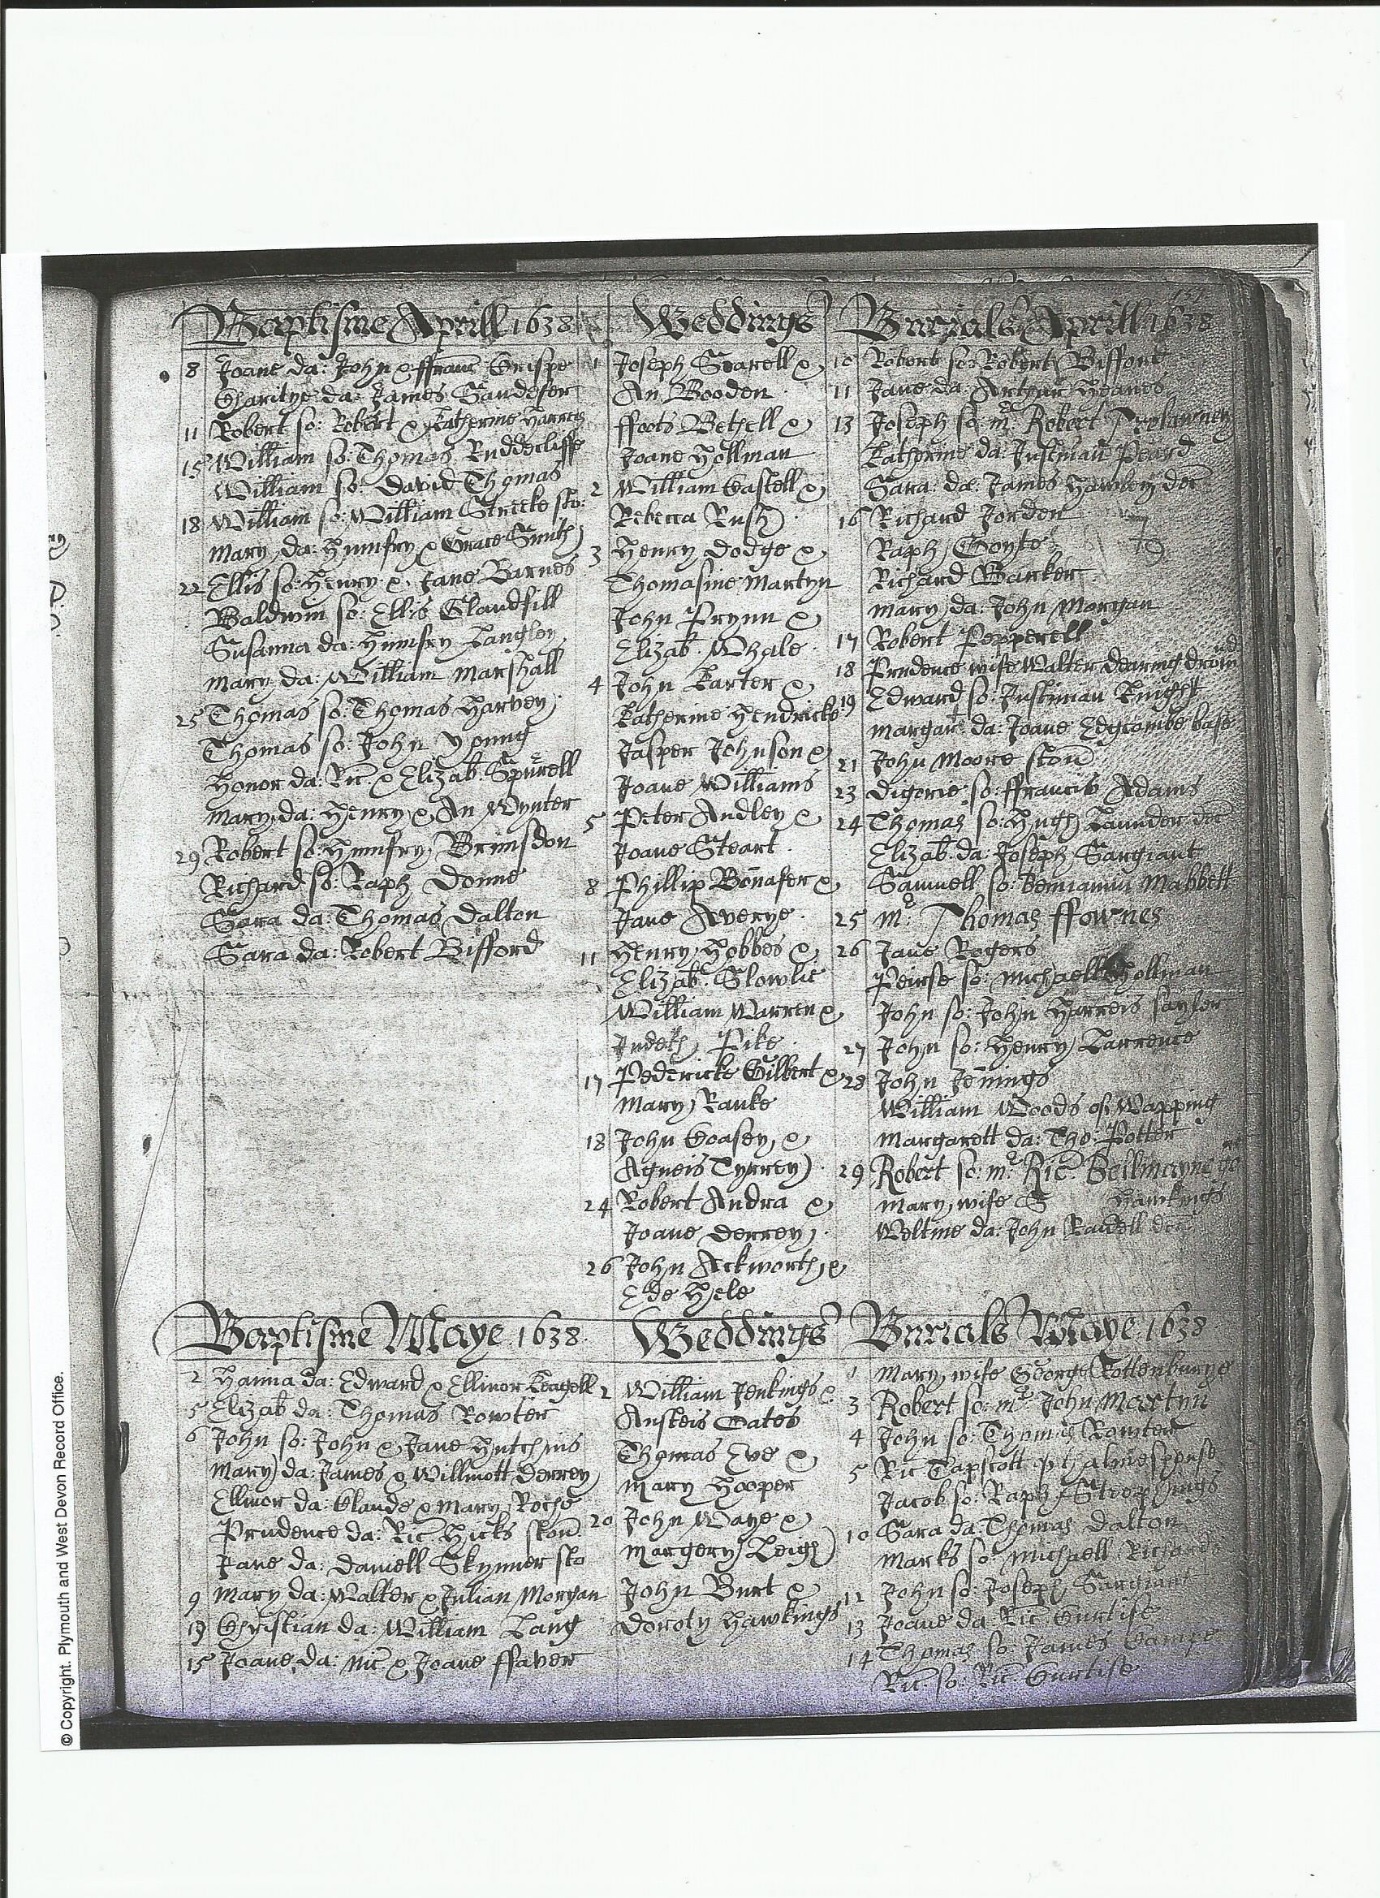 C:\Users\Virginia Rundle\Documents\Ancestry\Northey Moar Files\Warren\Marriage of William Warren and Judeth Pike 11 April 1638 at St Andrews Plymouth.jpg